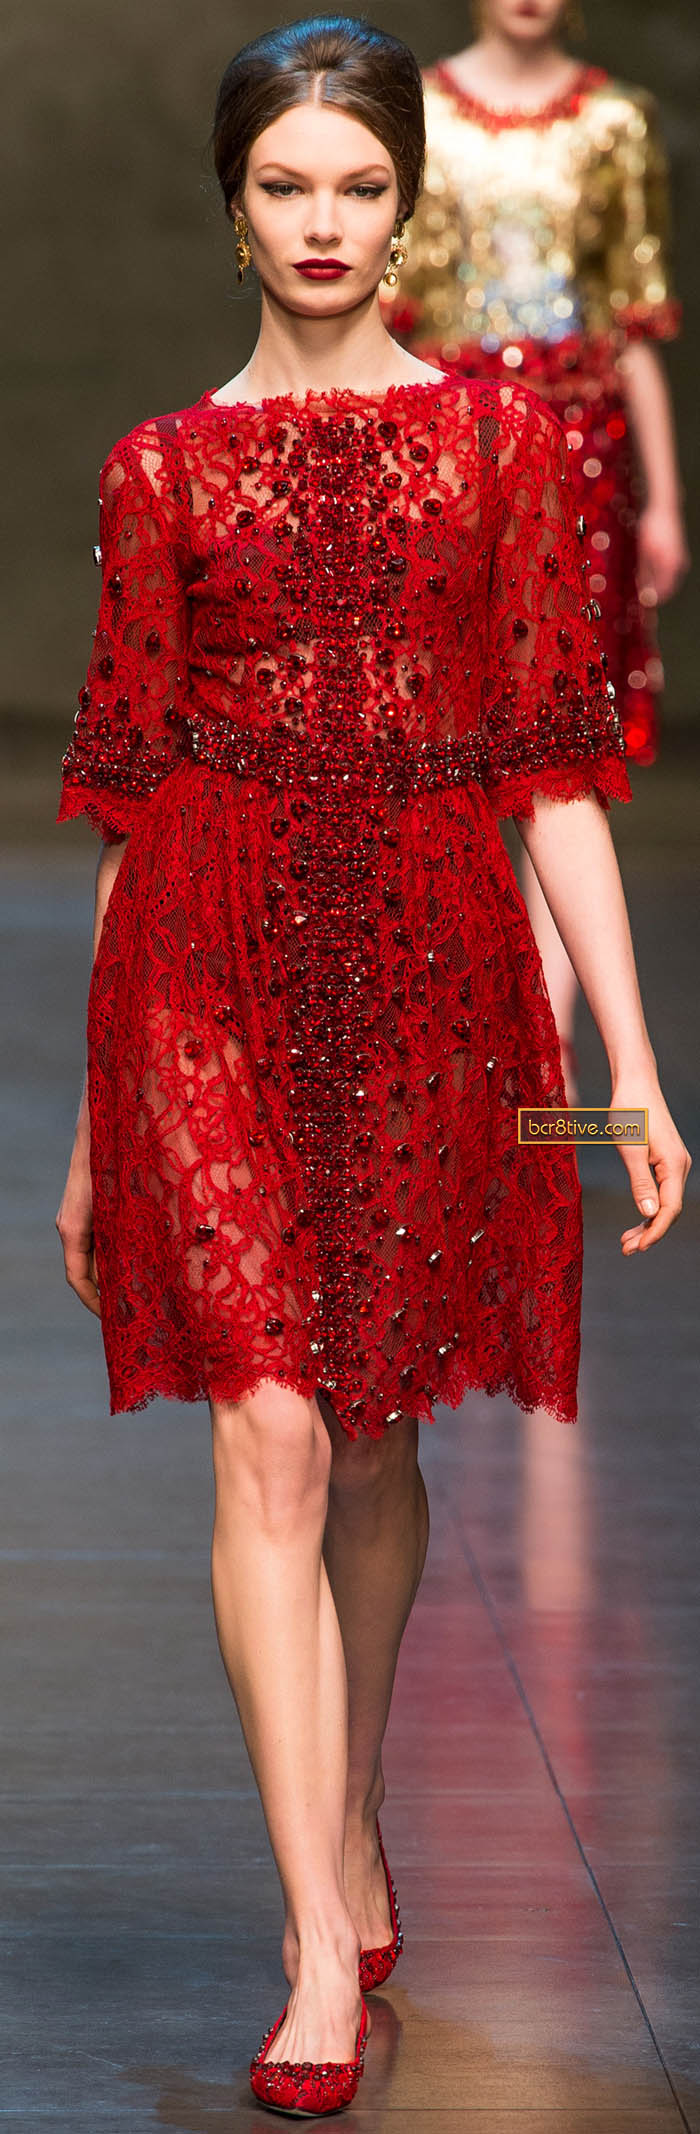 Dolce & Gabanna Fall Winter 2013-14 – Page 3 – Be Creative